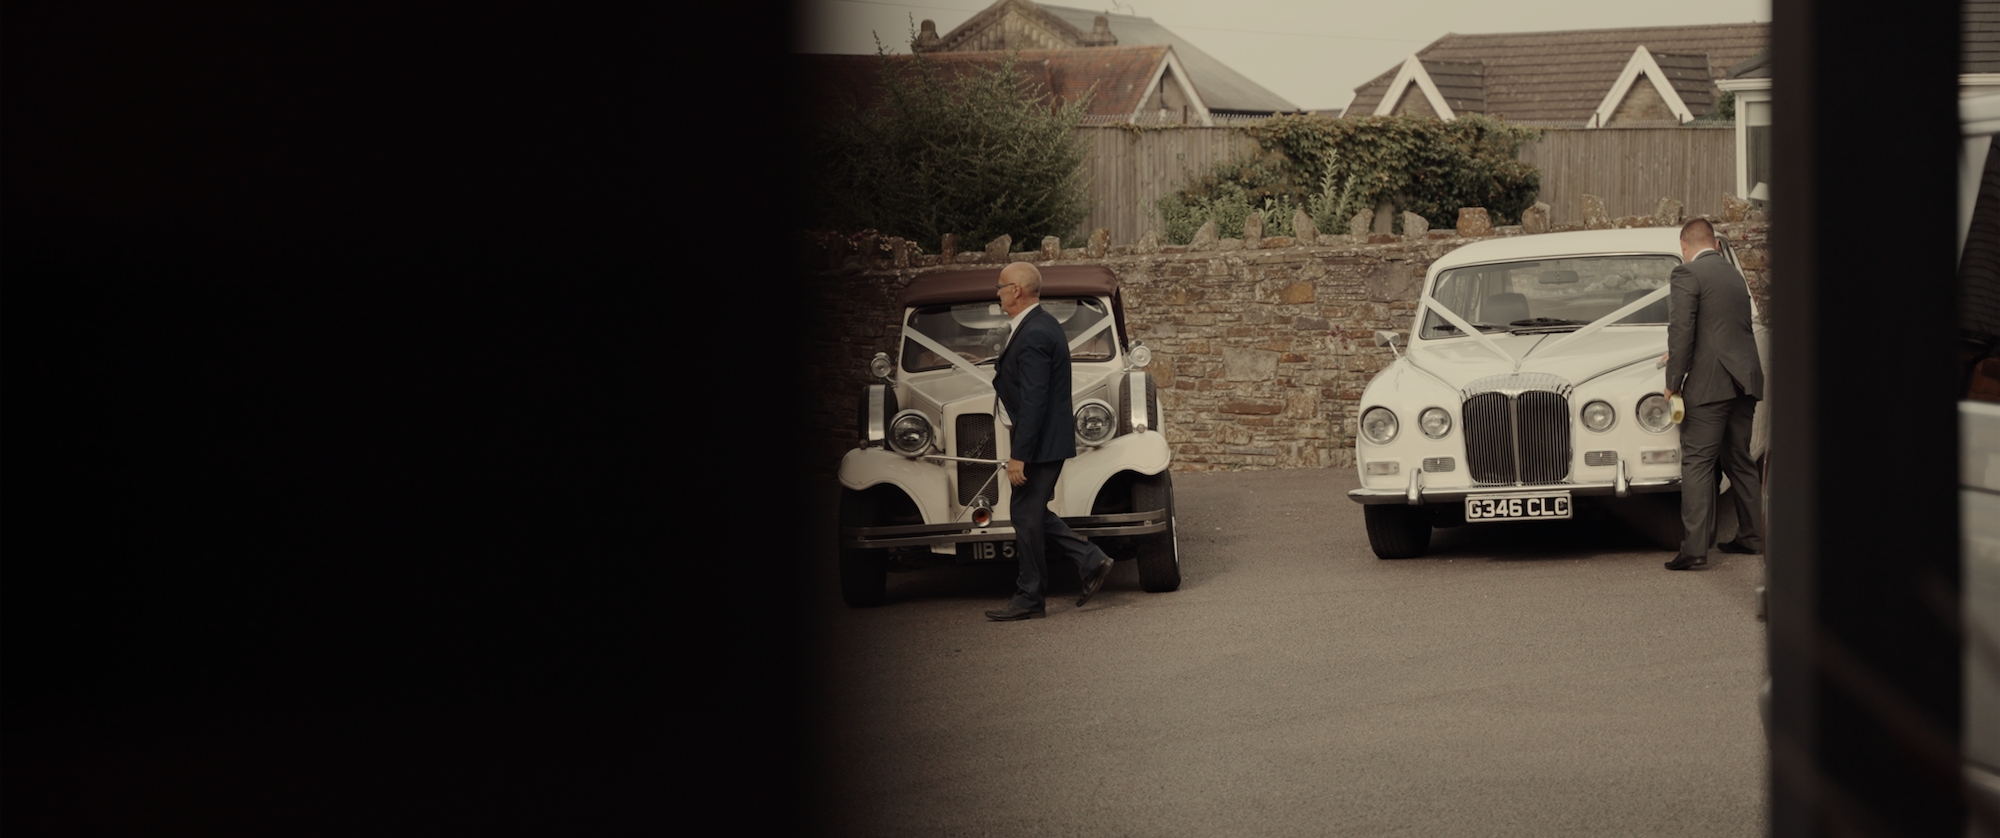 Oxwich Bay Hotel Wedding Videography by Ben Holbrook Films (Swansea South Wales).jpeg13.png